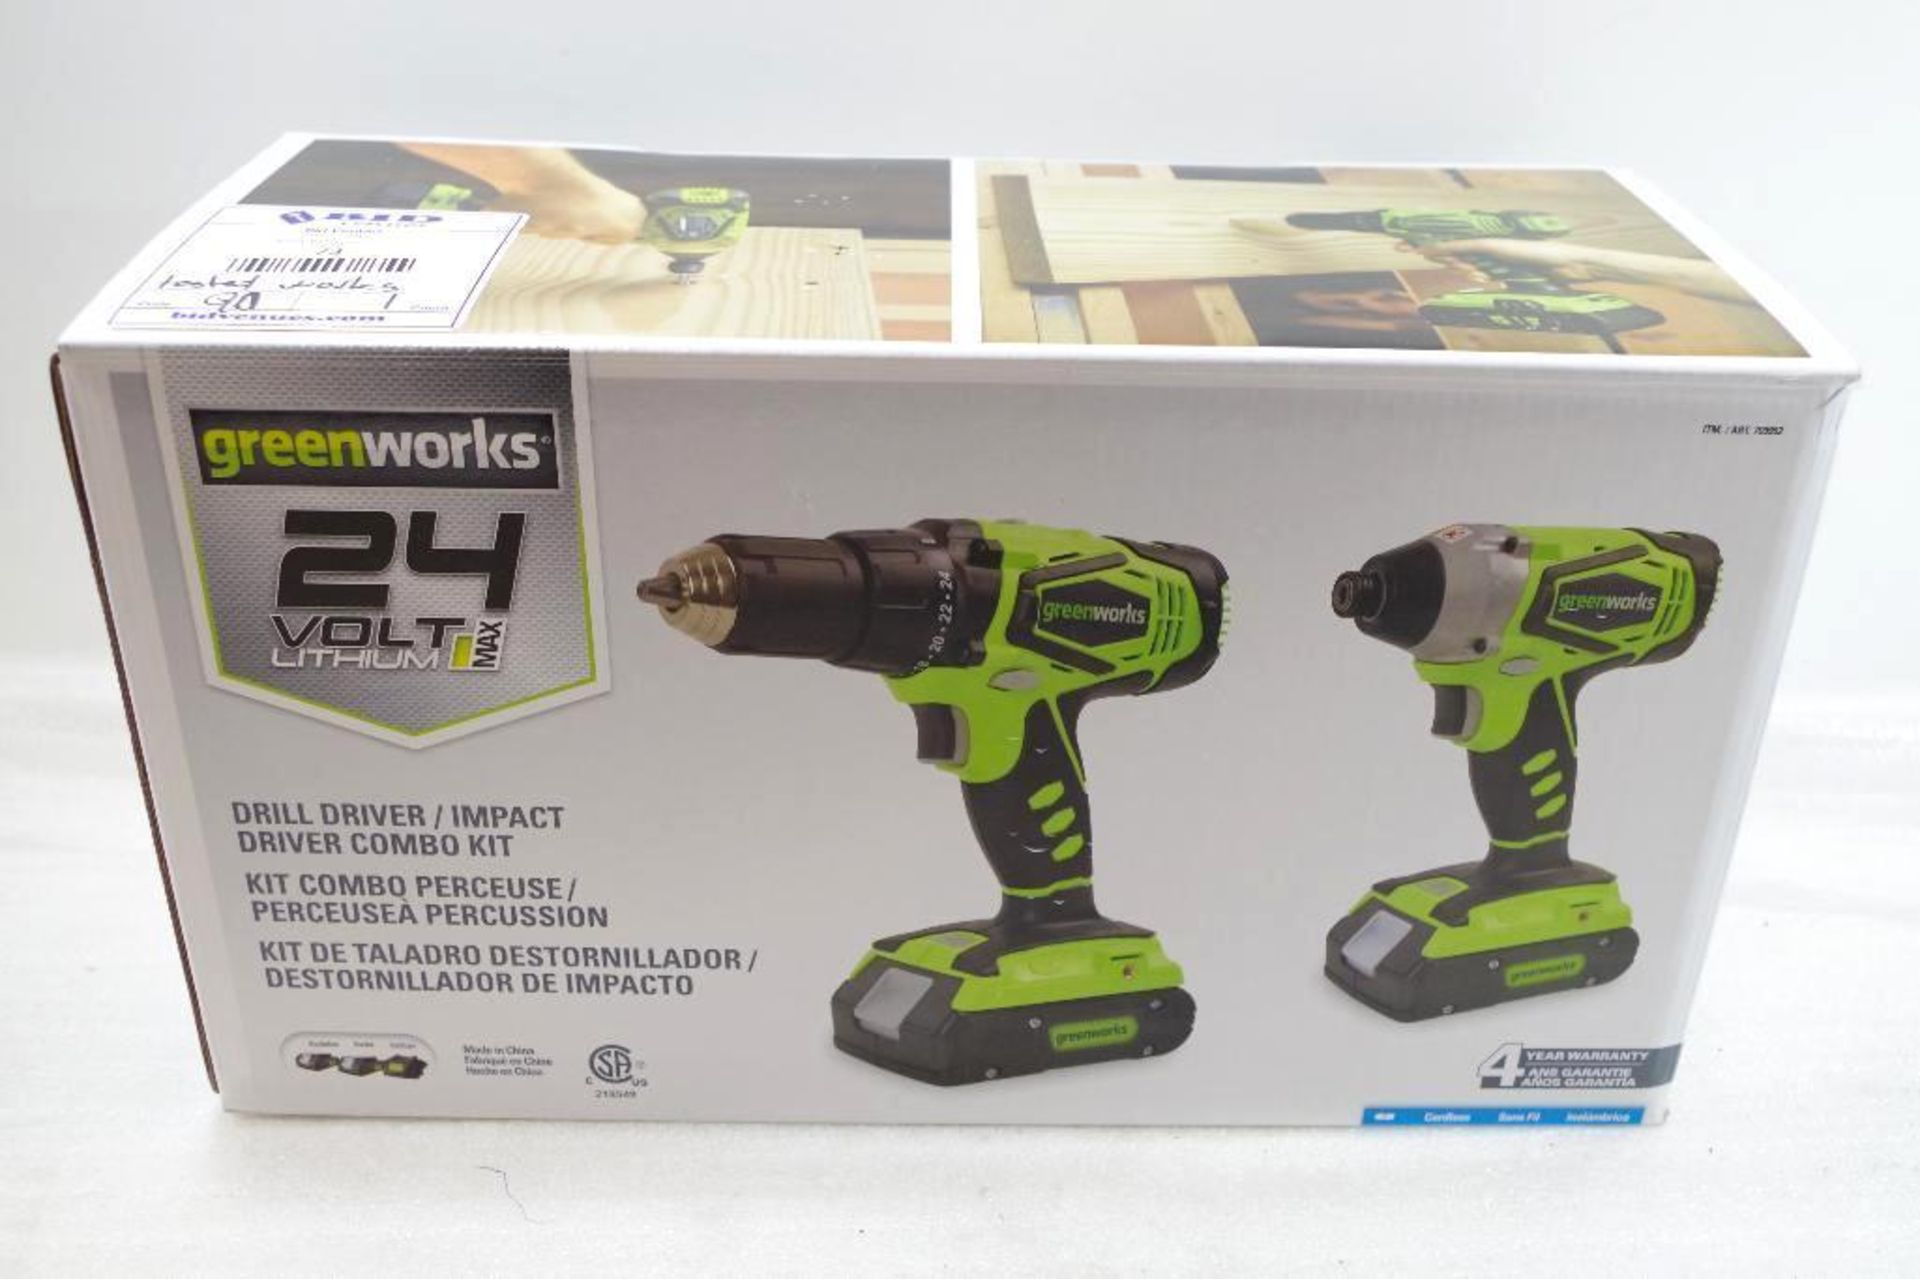 GREENWORKS 24V Lithium MAX Drill Driver/Impact Driver Combo Kit (Open box, Tested OK)